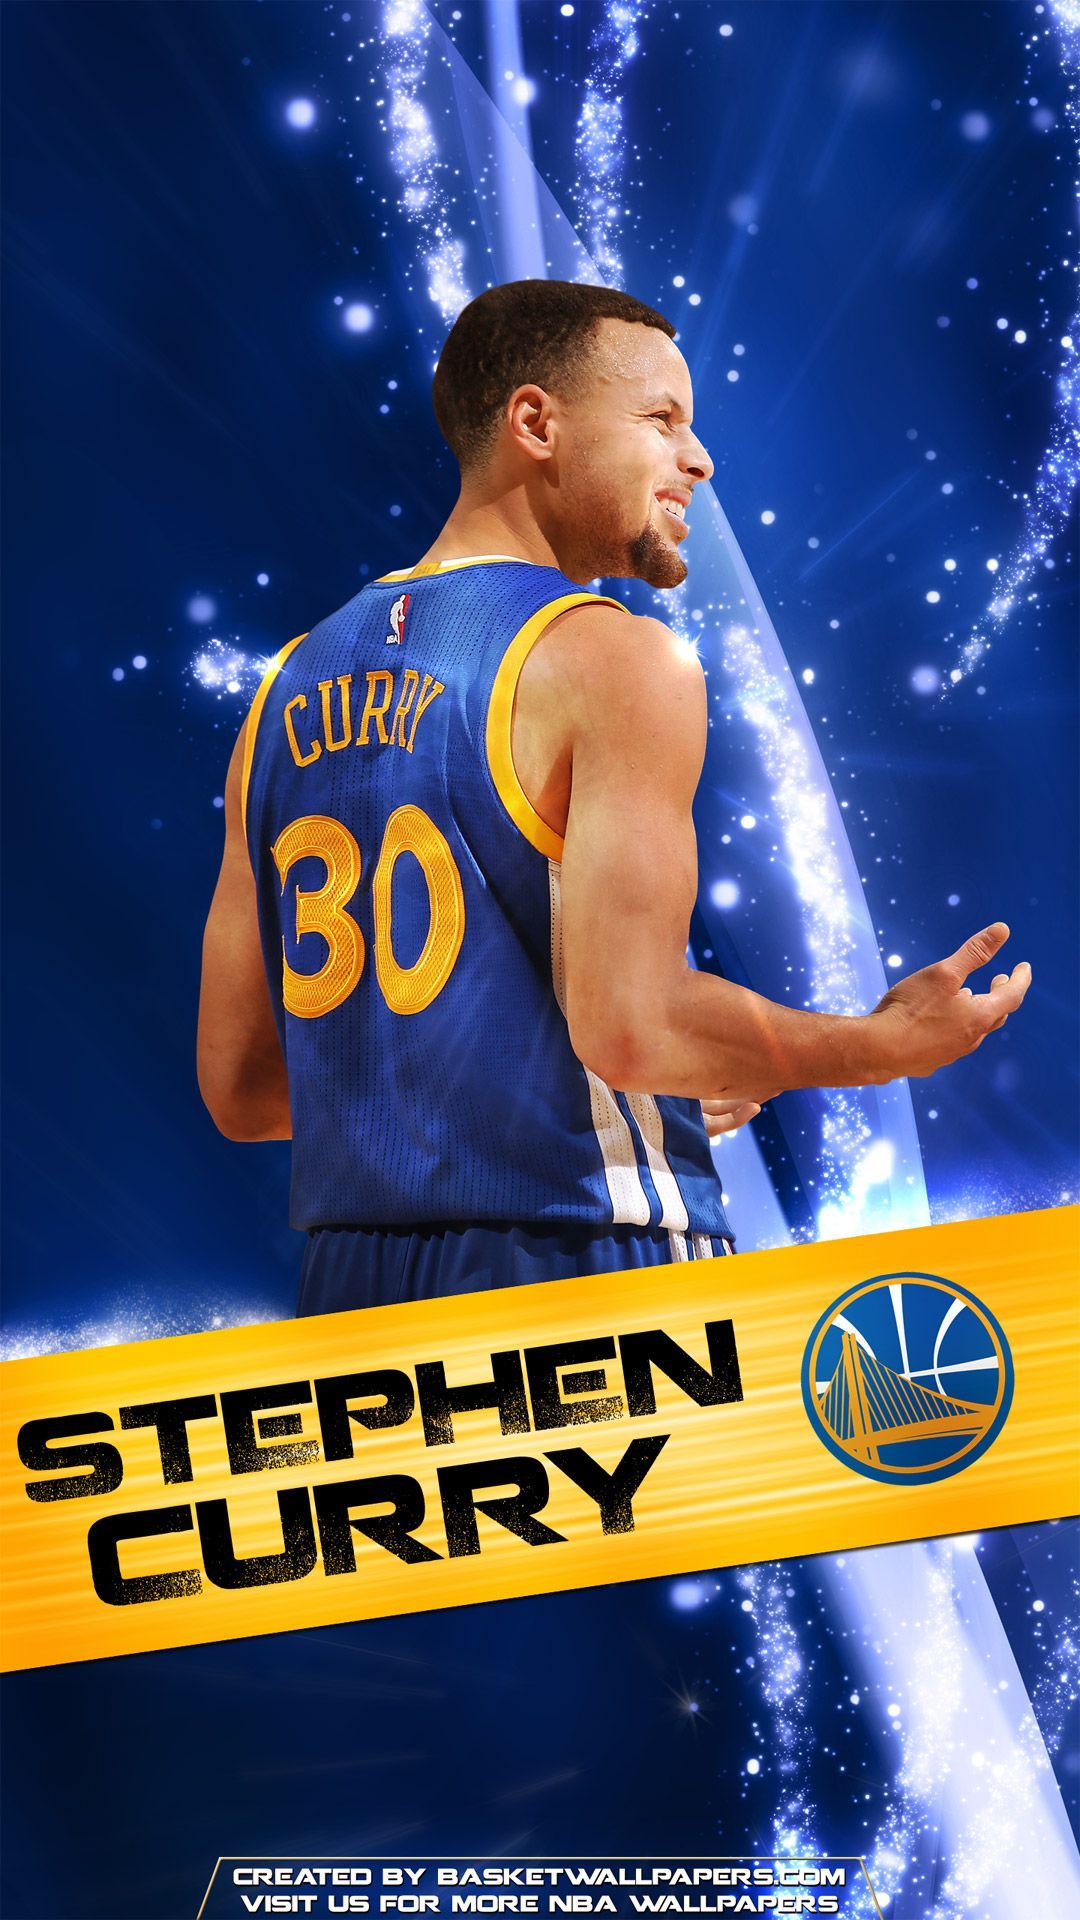 Arm and Stephen Curry Basketball Wallpaper